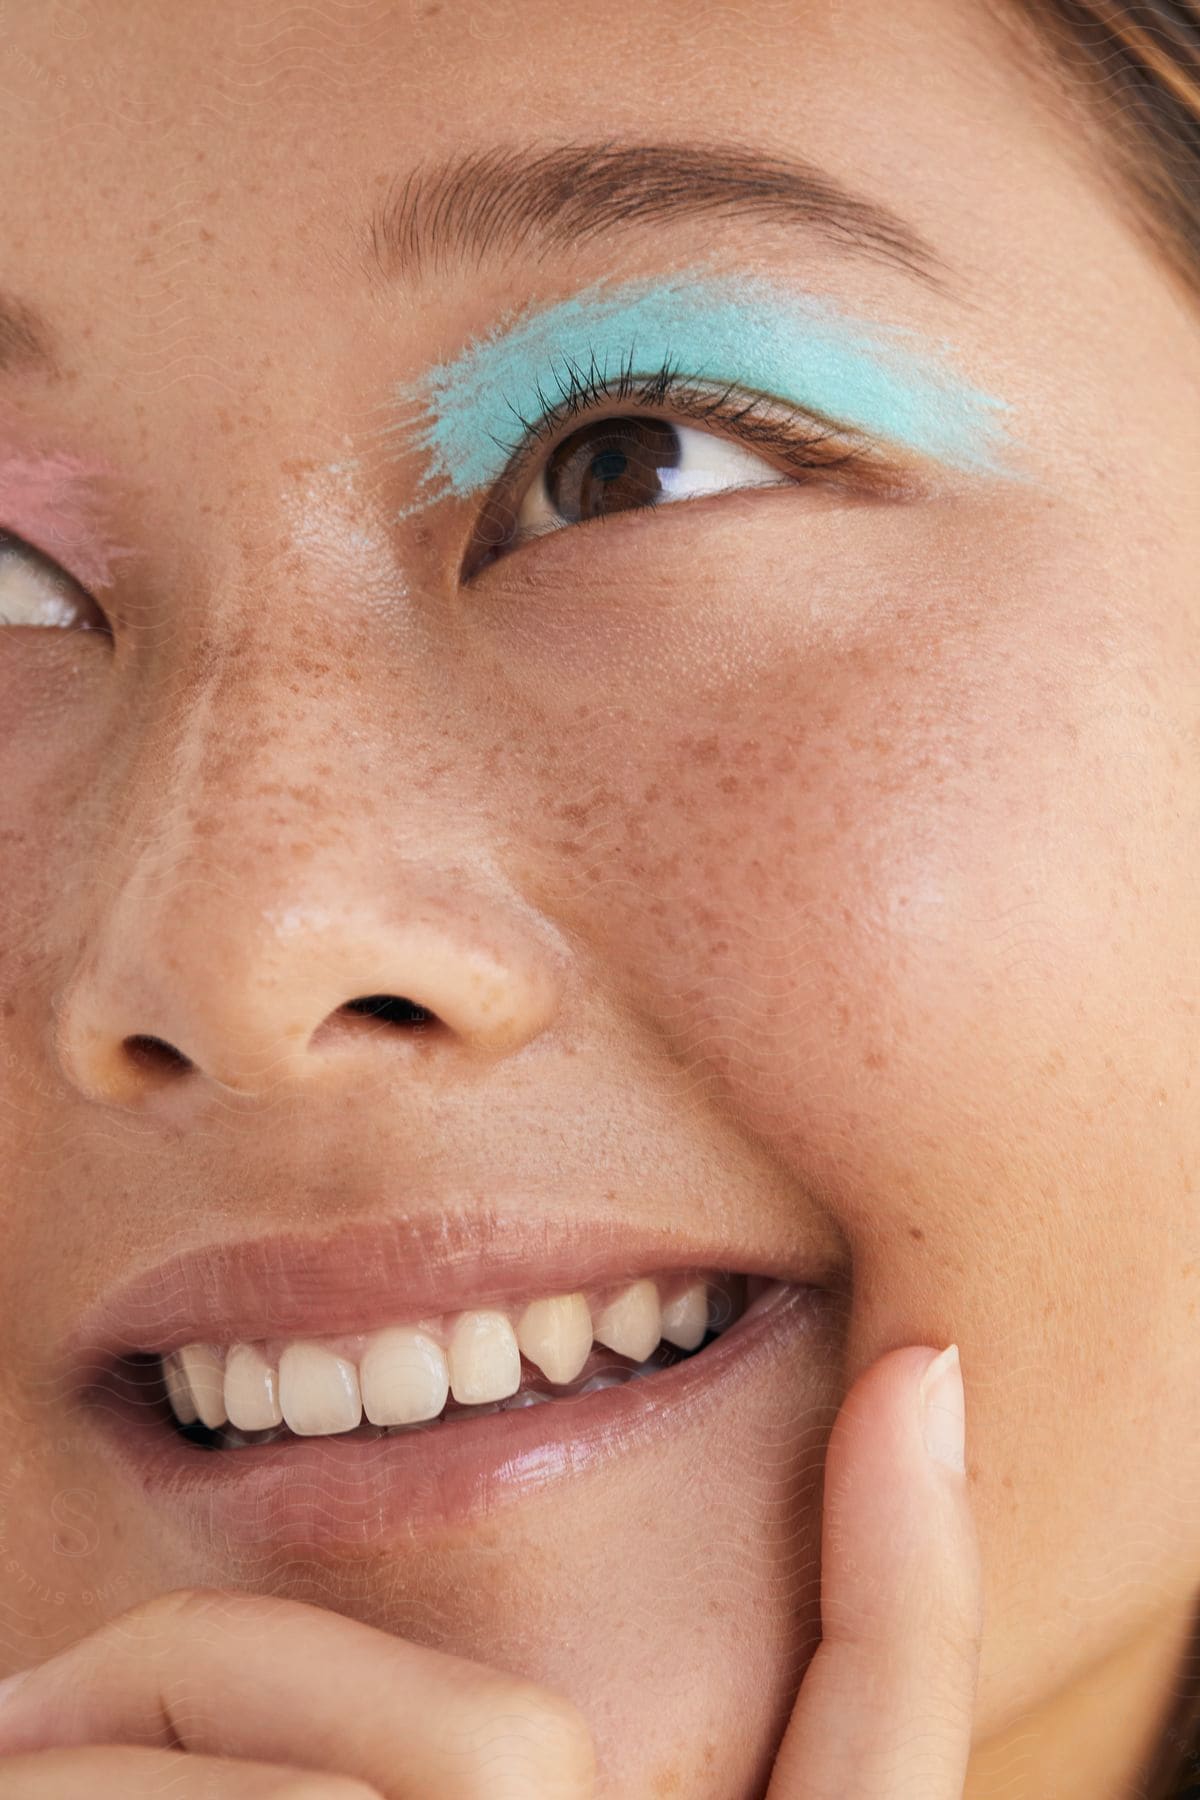 A girl wearing a stripe of light blue paint above her eye looks up as she smiles with her hand on her chin